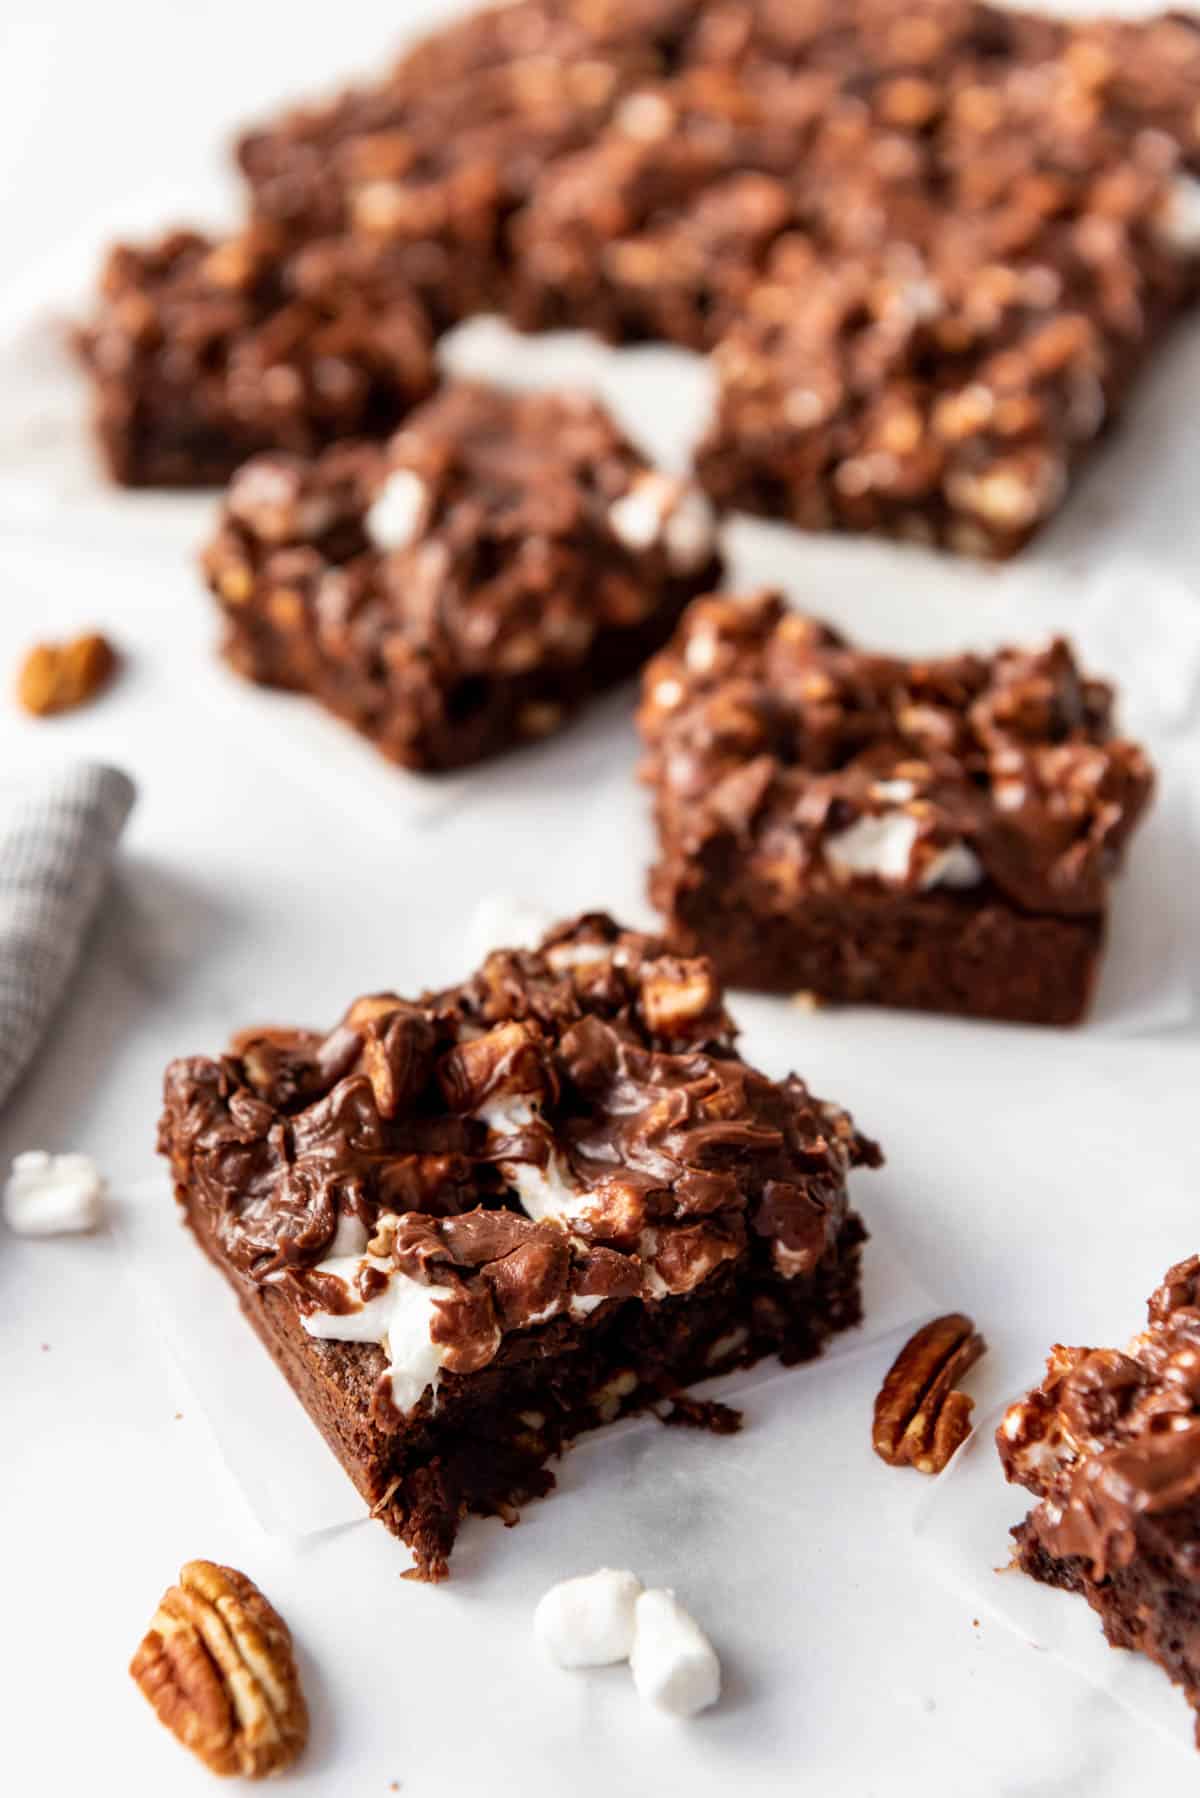 Mississippi mud brownie squares next to scattered marshmallows and pecans.